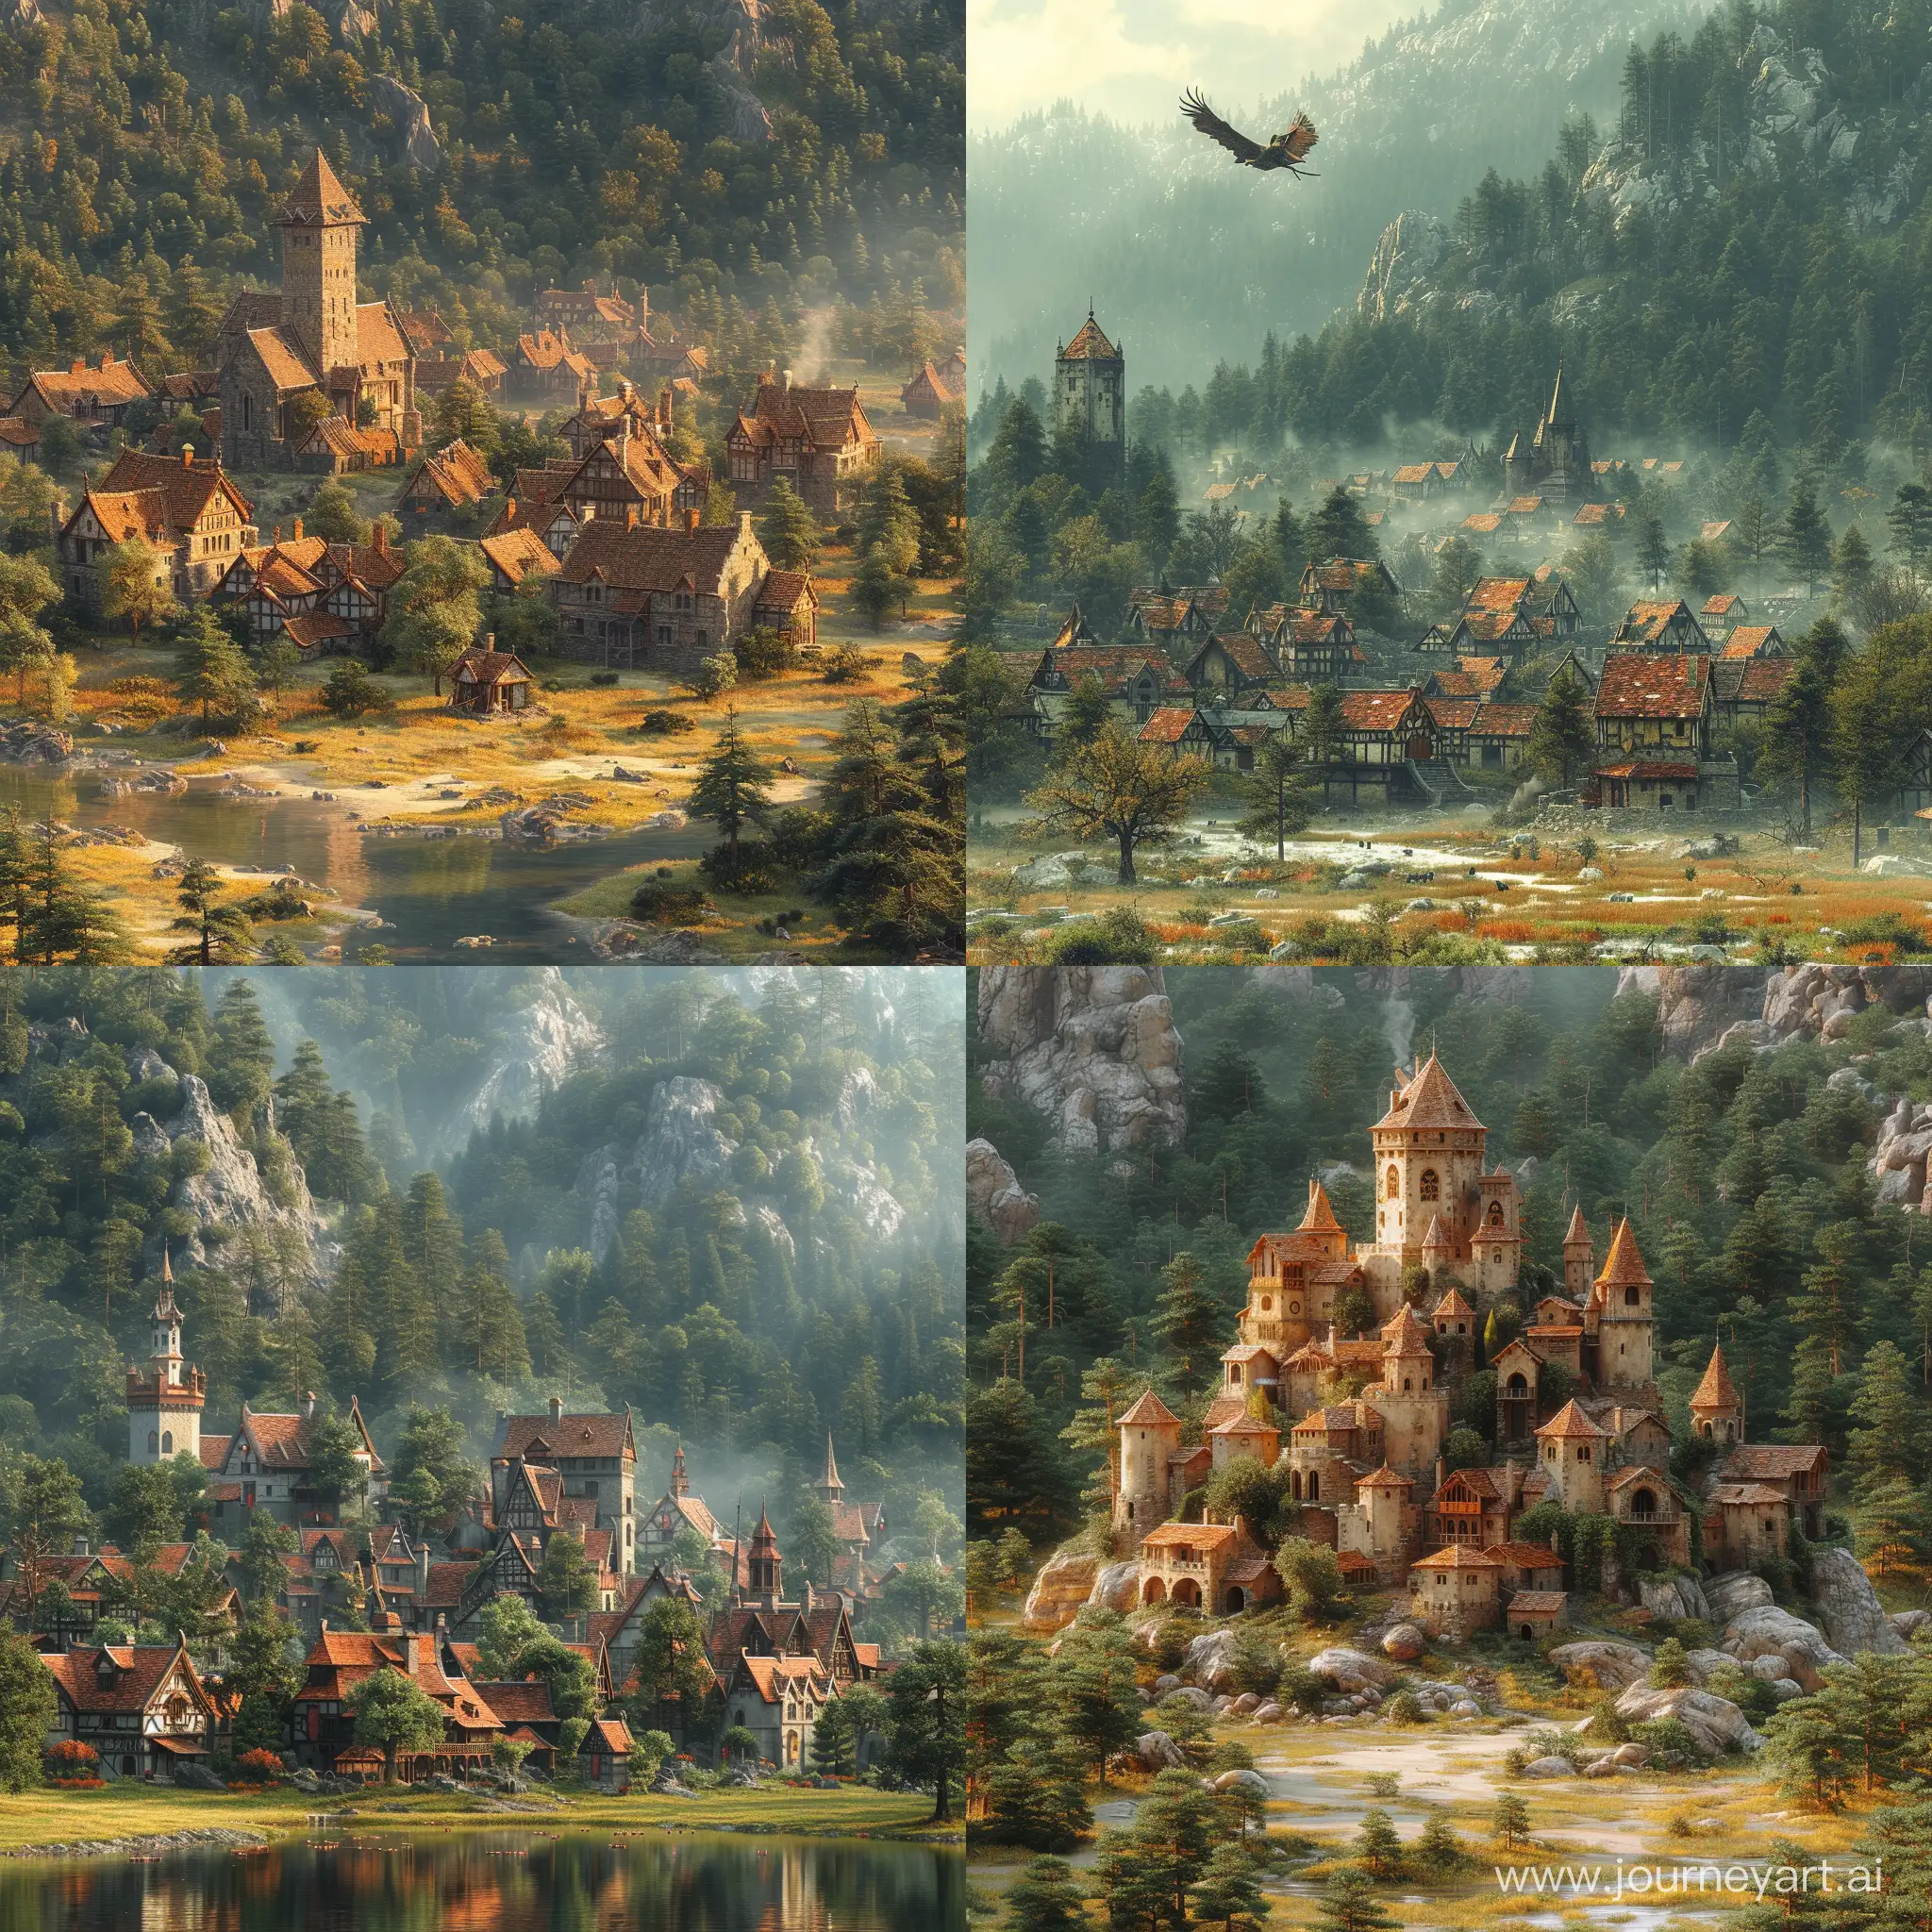 Realistic-Medieval-Cityscape-in-a-Fantasy-Forest-Setting